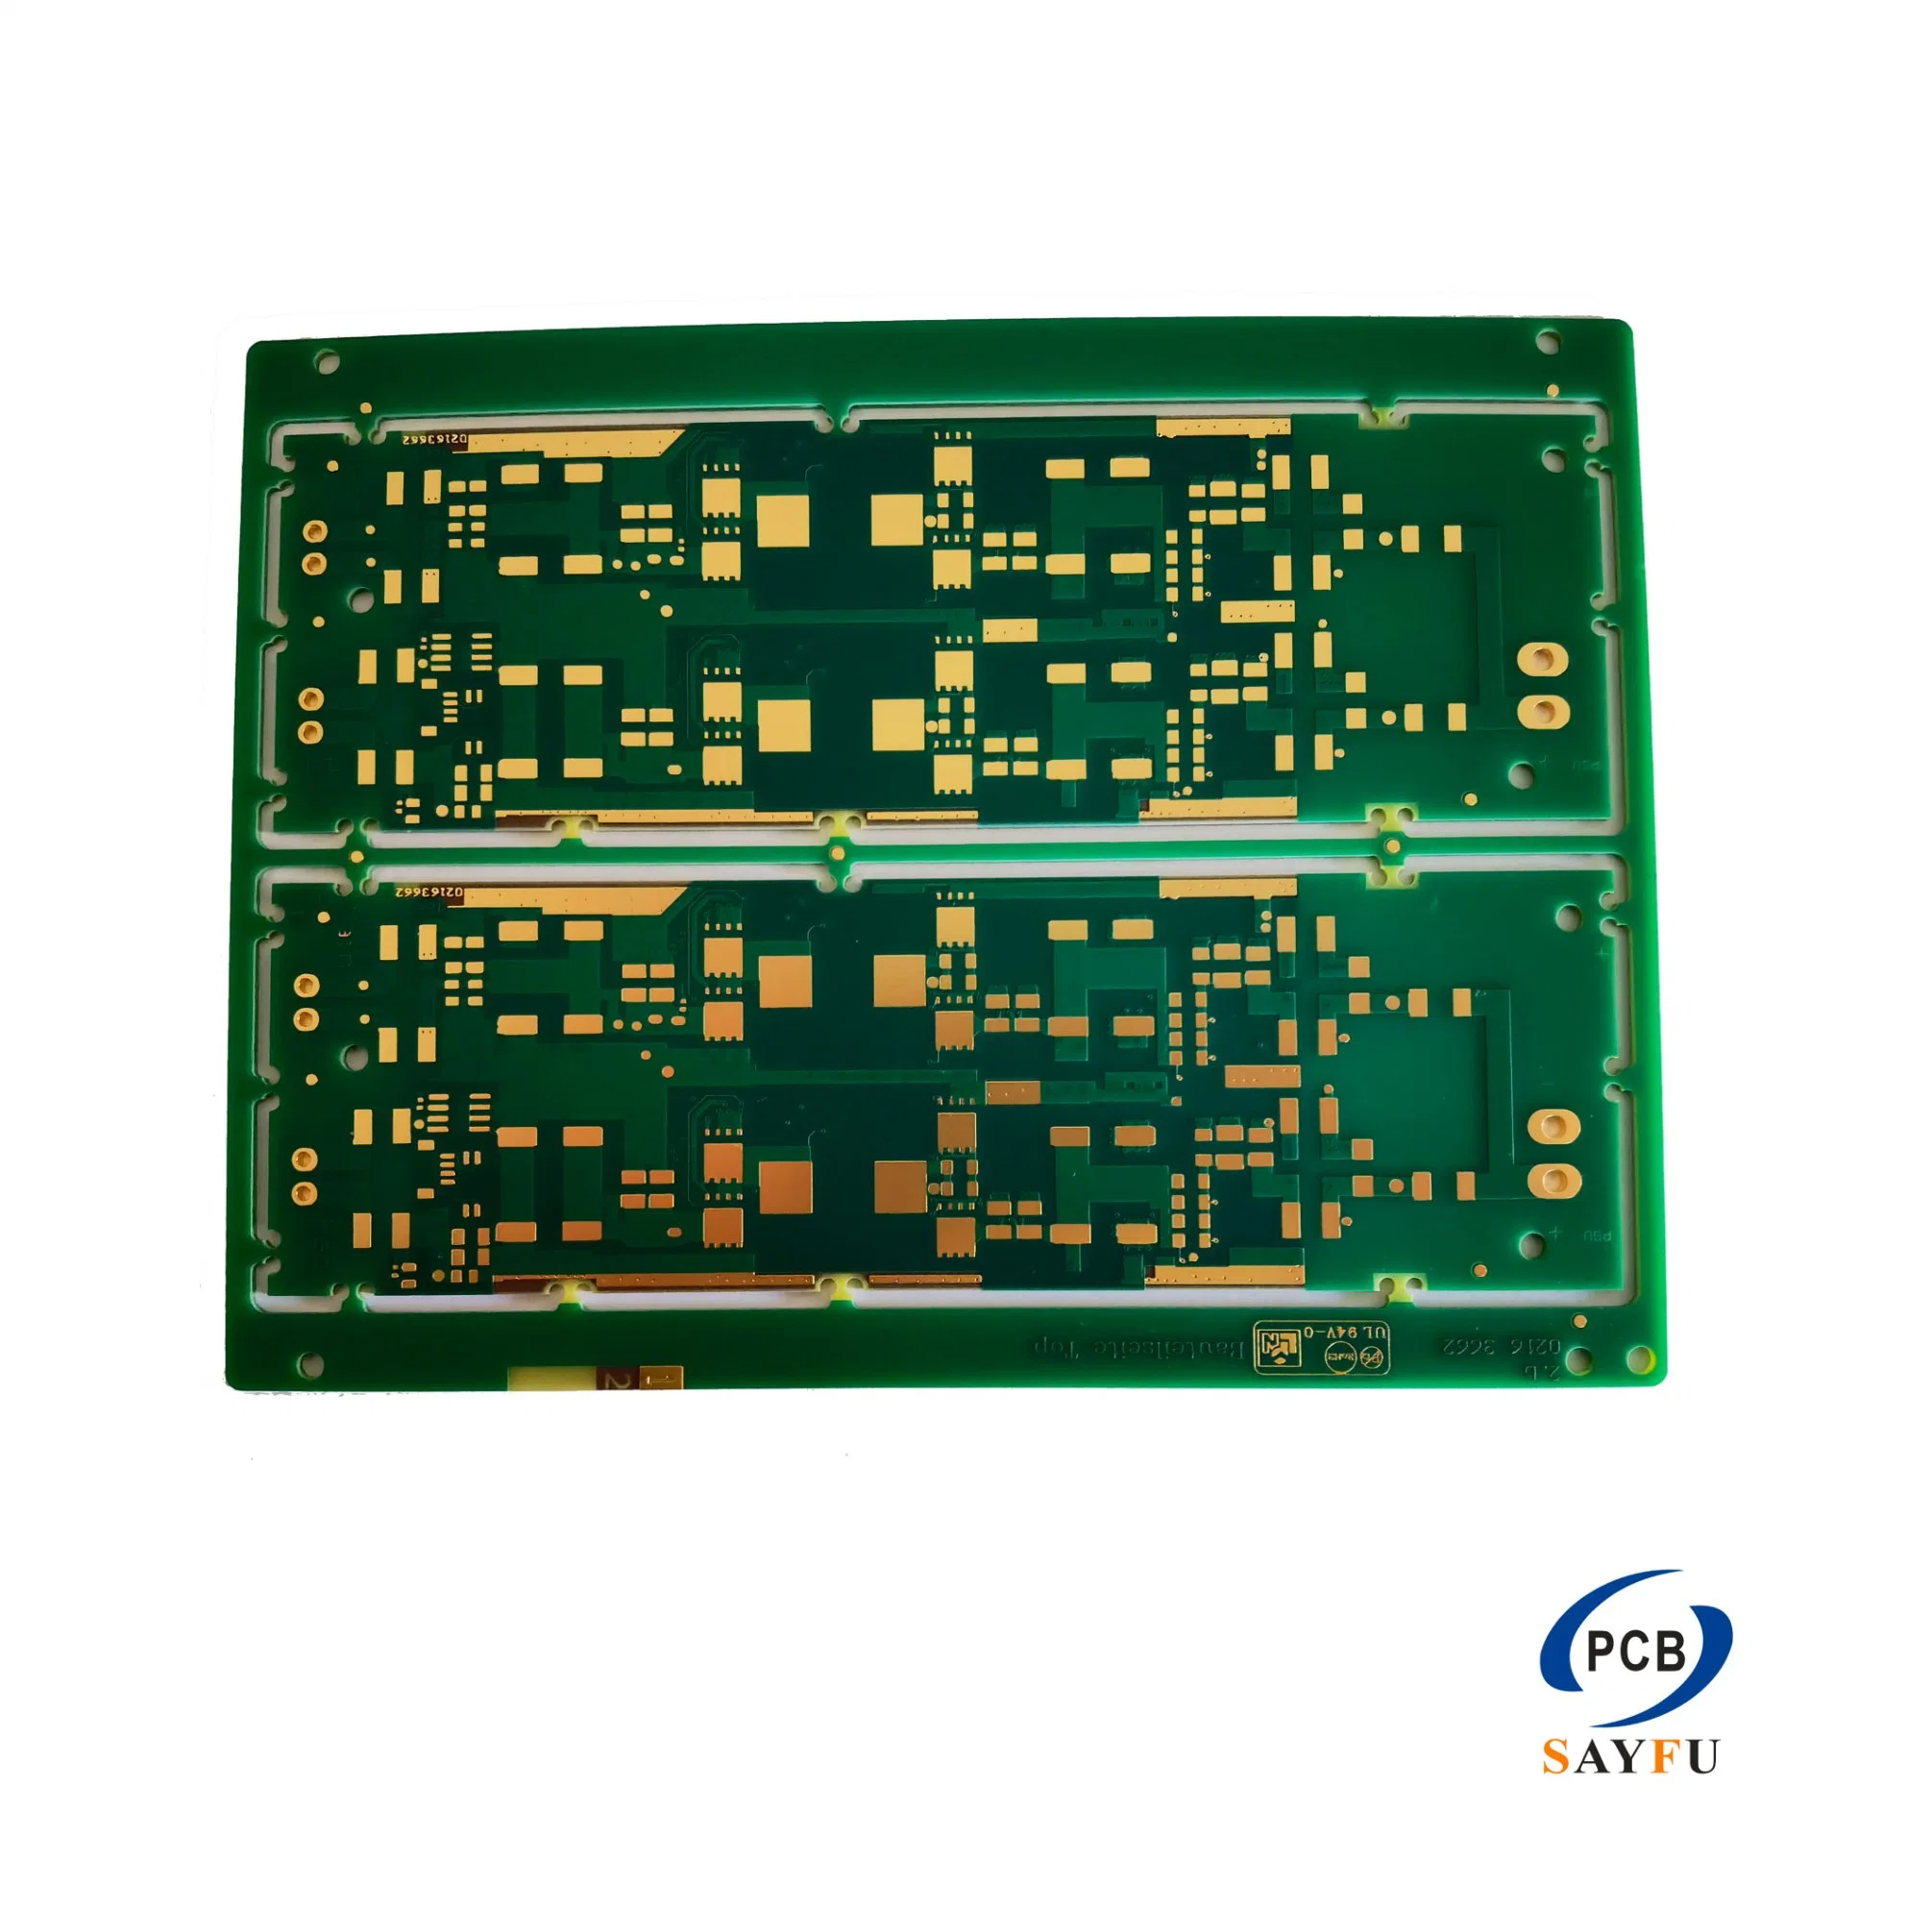 PCB Bare Board for Consumer Electronics and Other Electronics with UL and ISO Certification and Good Price